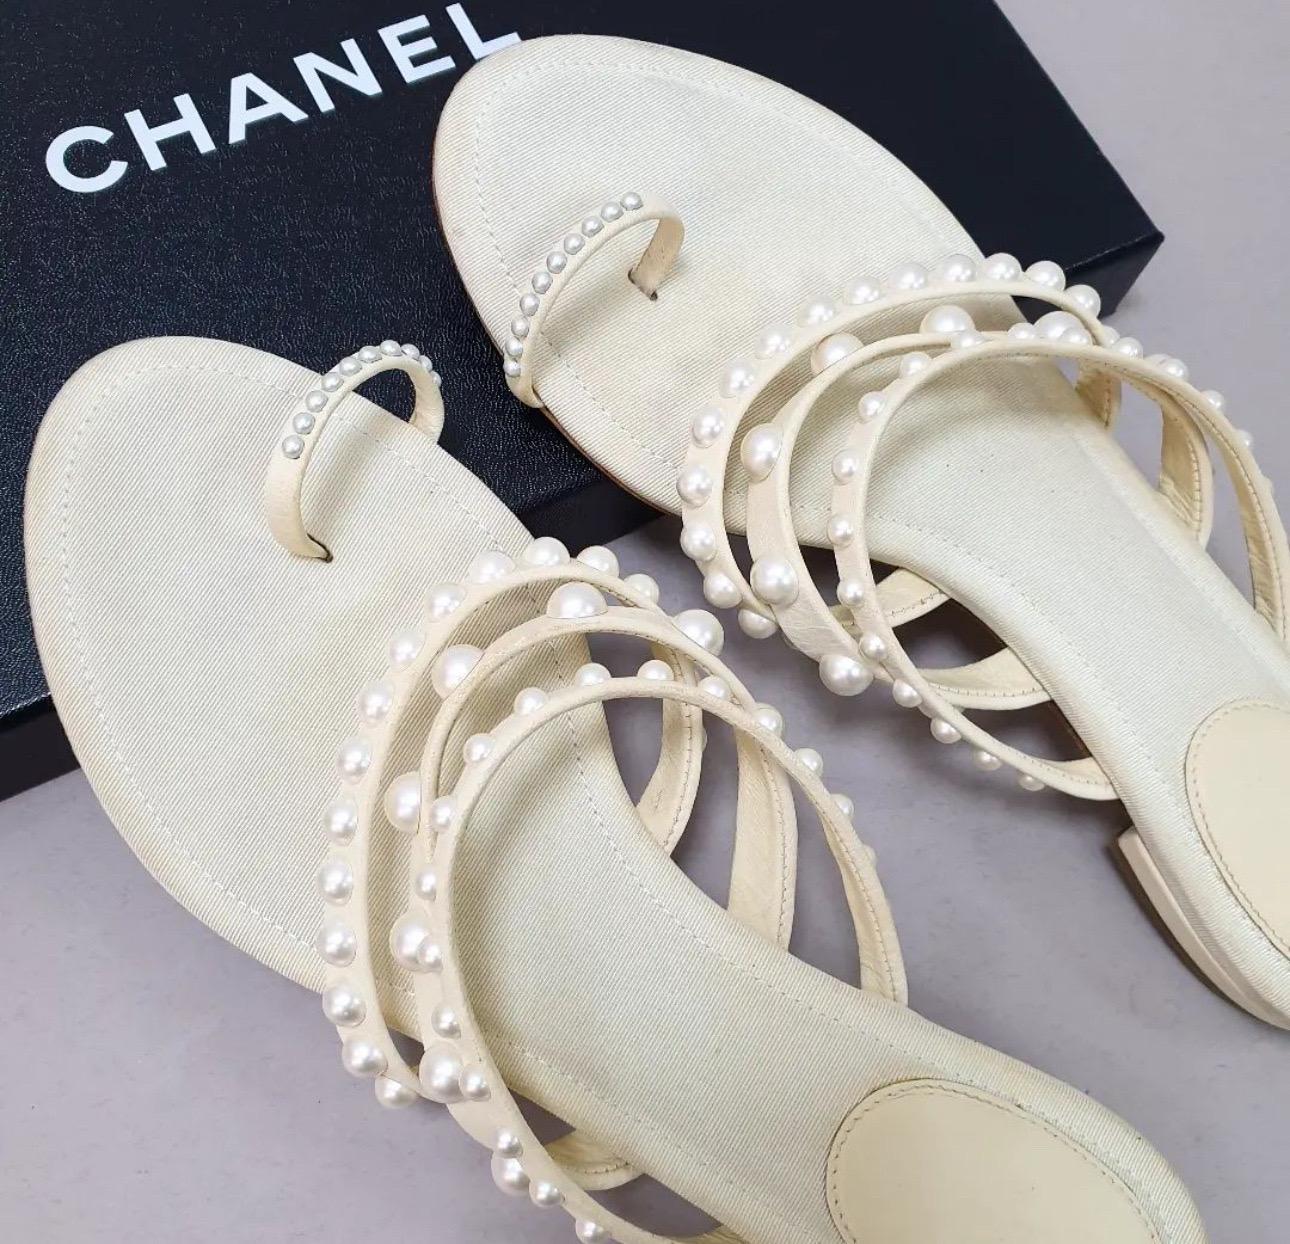 Chanel Ivory Pearl Embelished Leather Mule Sandals Flip Flops  In Good Condition For Sale In Krakow, PL